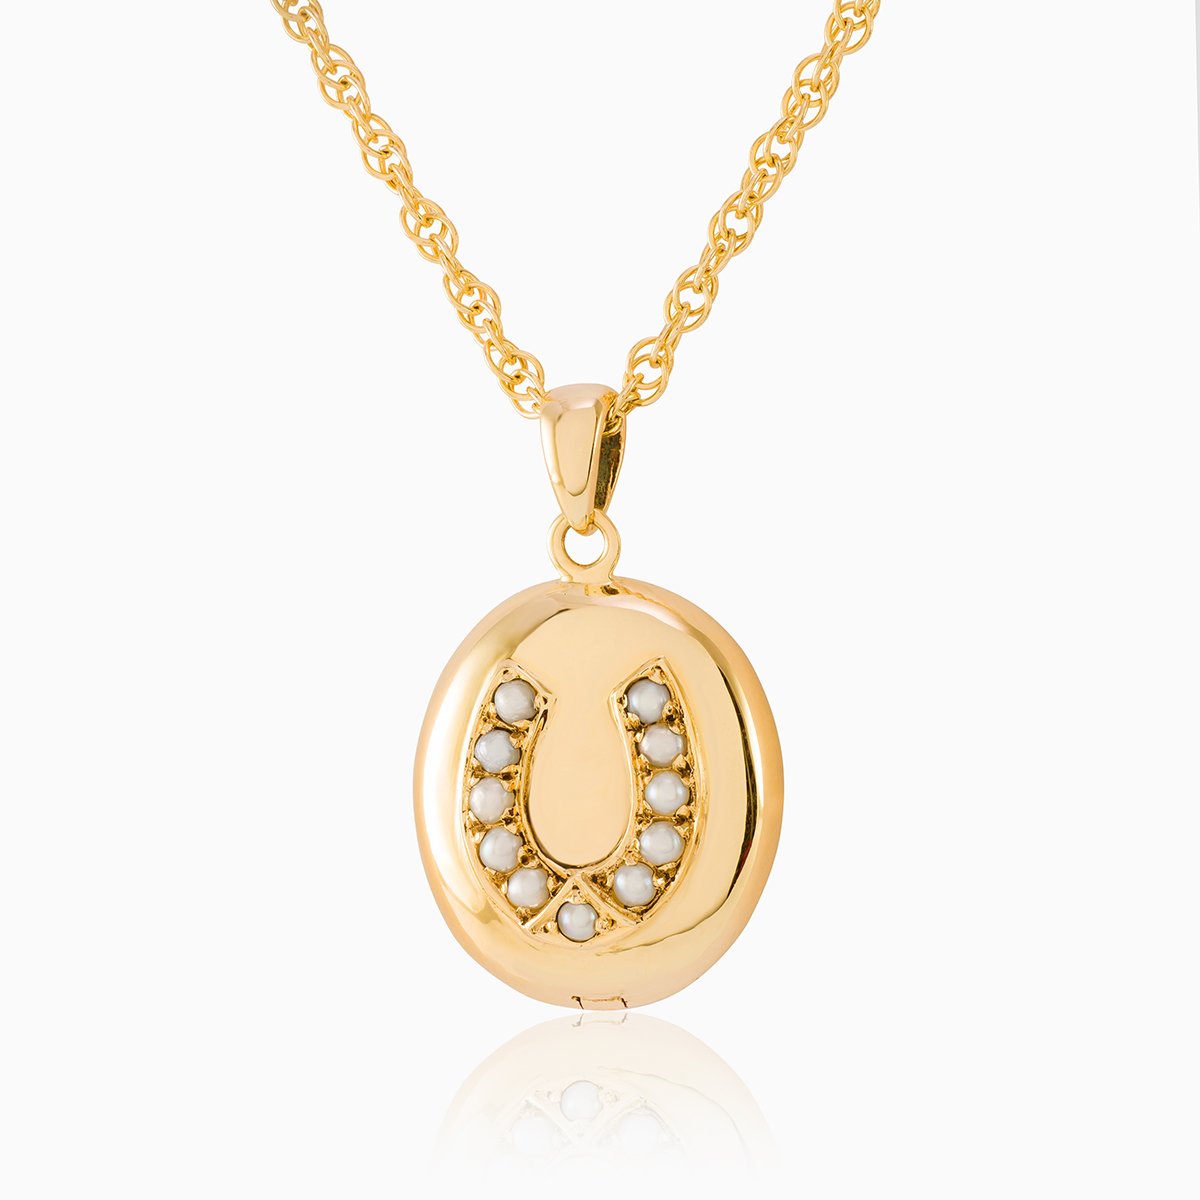 9 ct gold oval locket set with seed pearls in a horseshoe design on a 9 ct gold rope chain